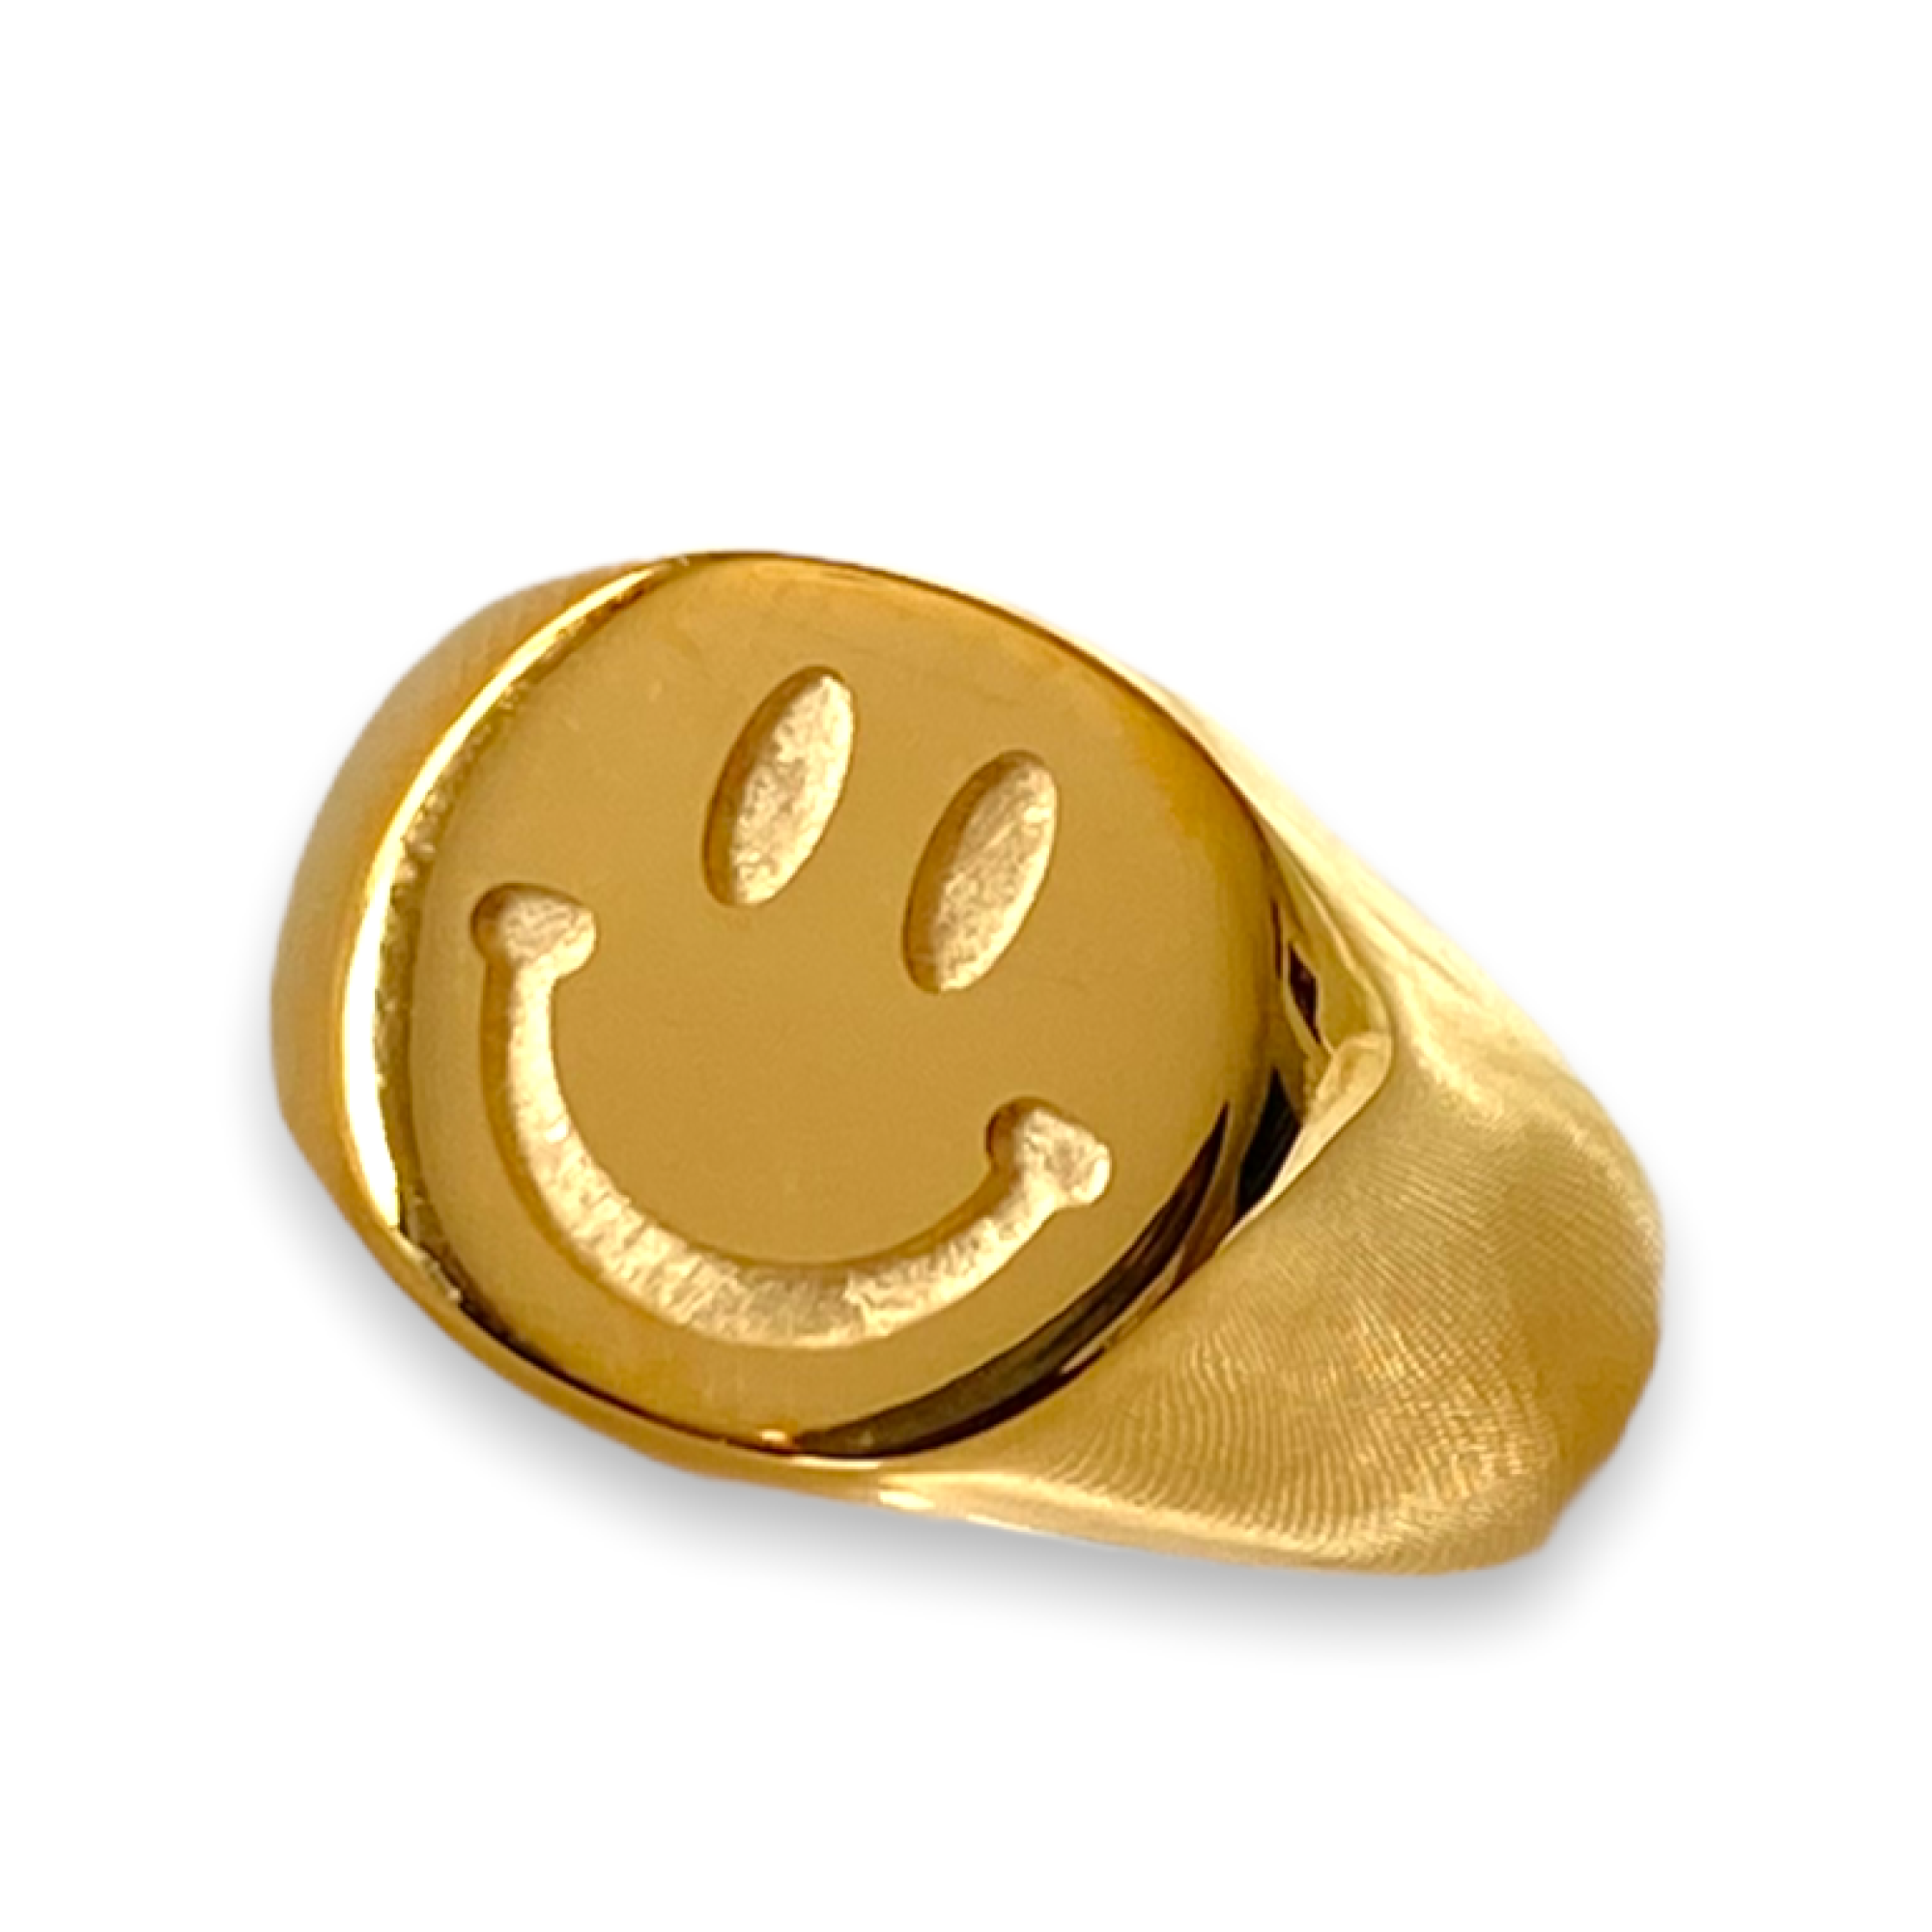 Gold ring with a smiley emoji front. 